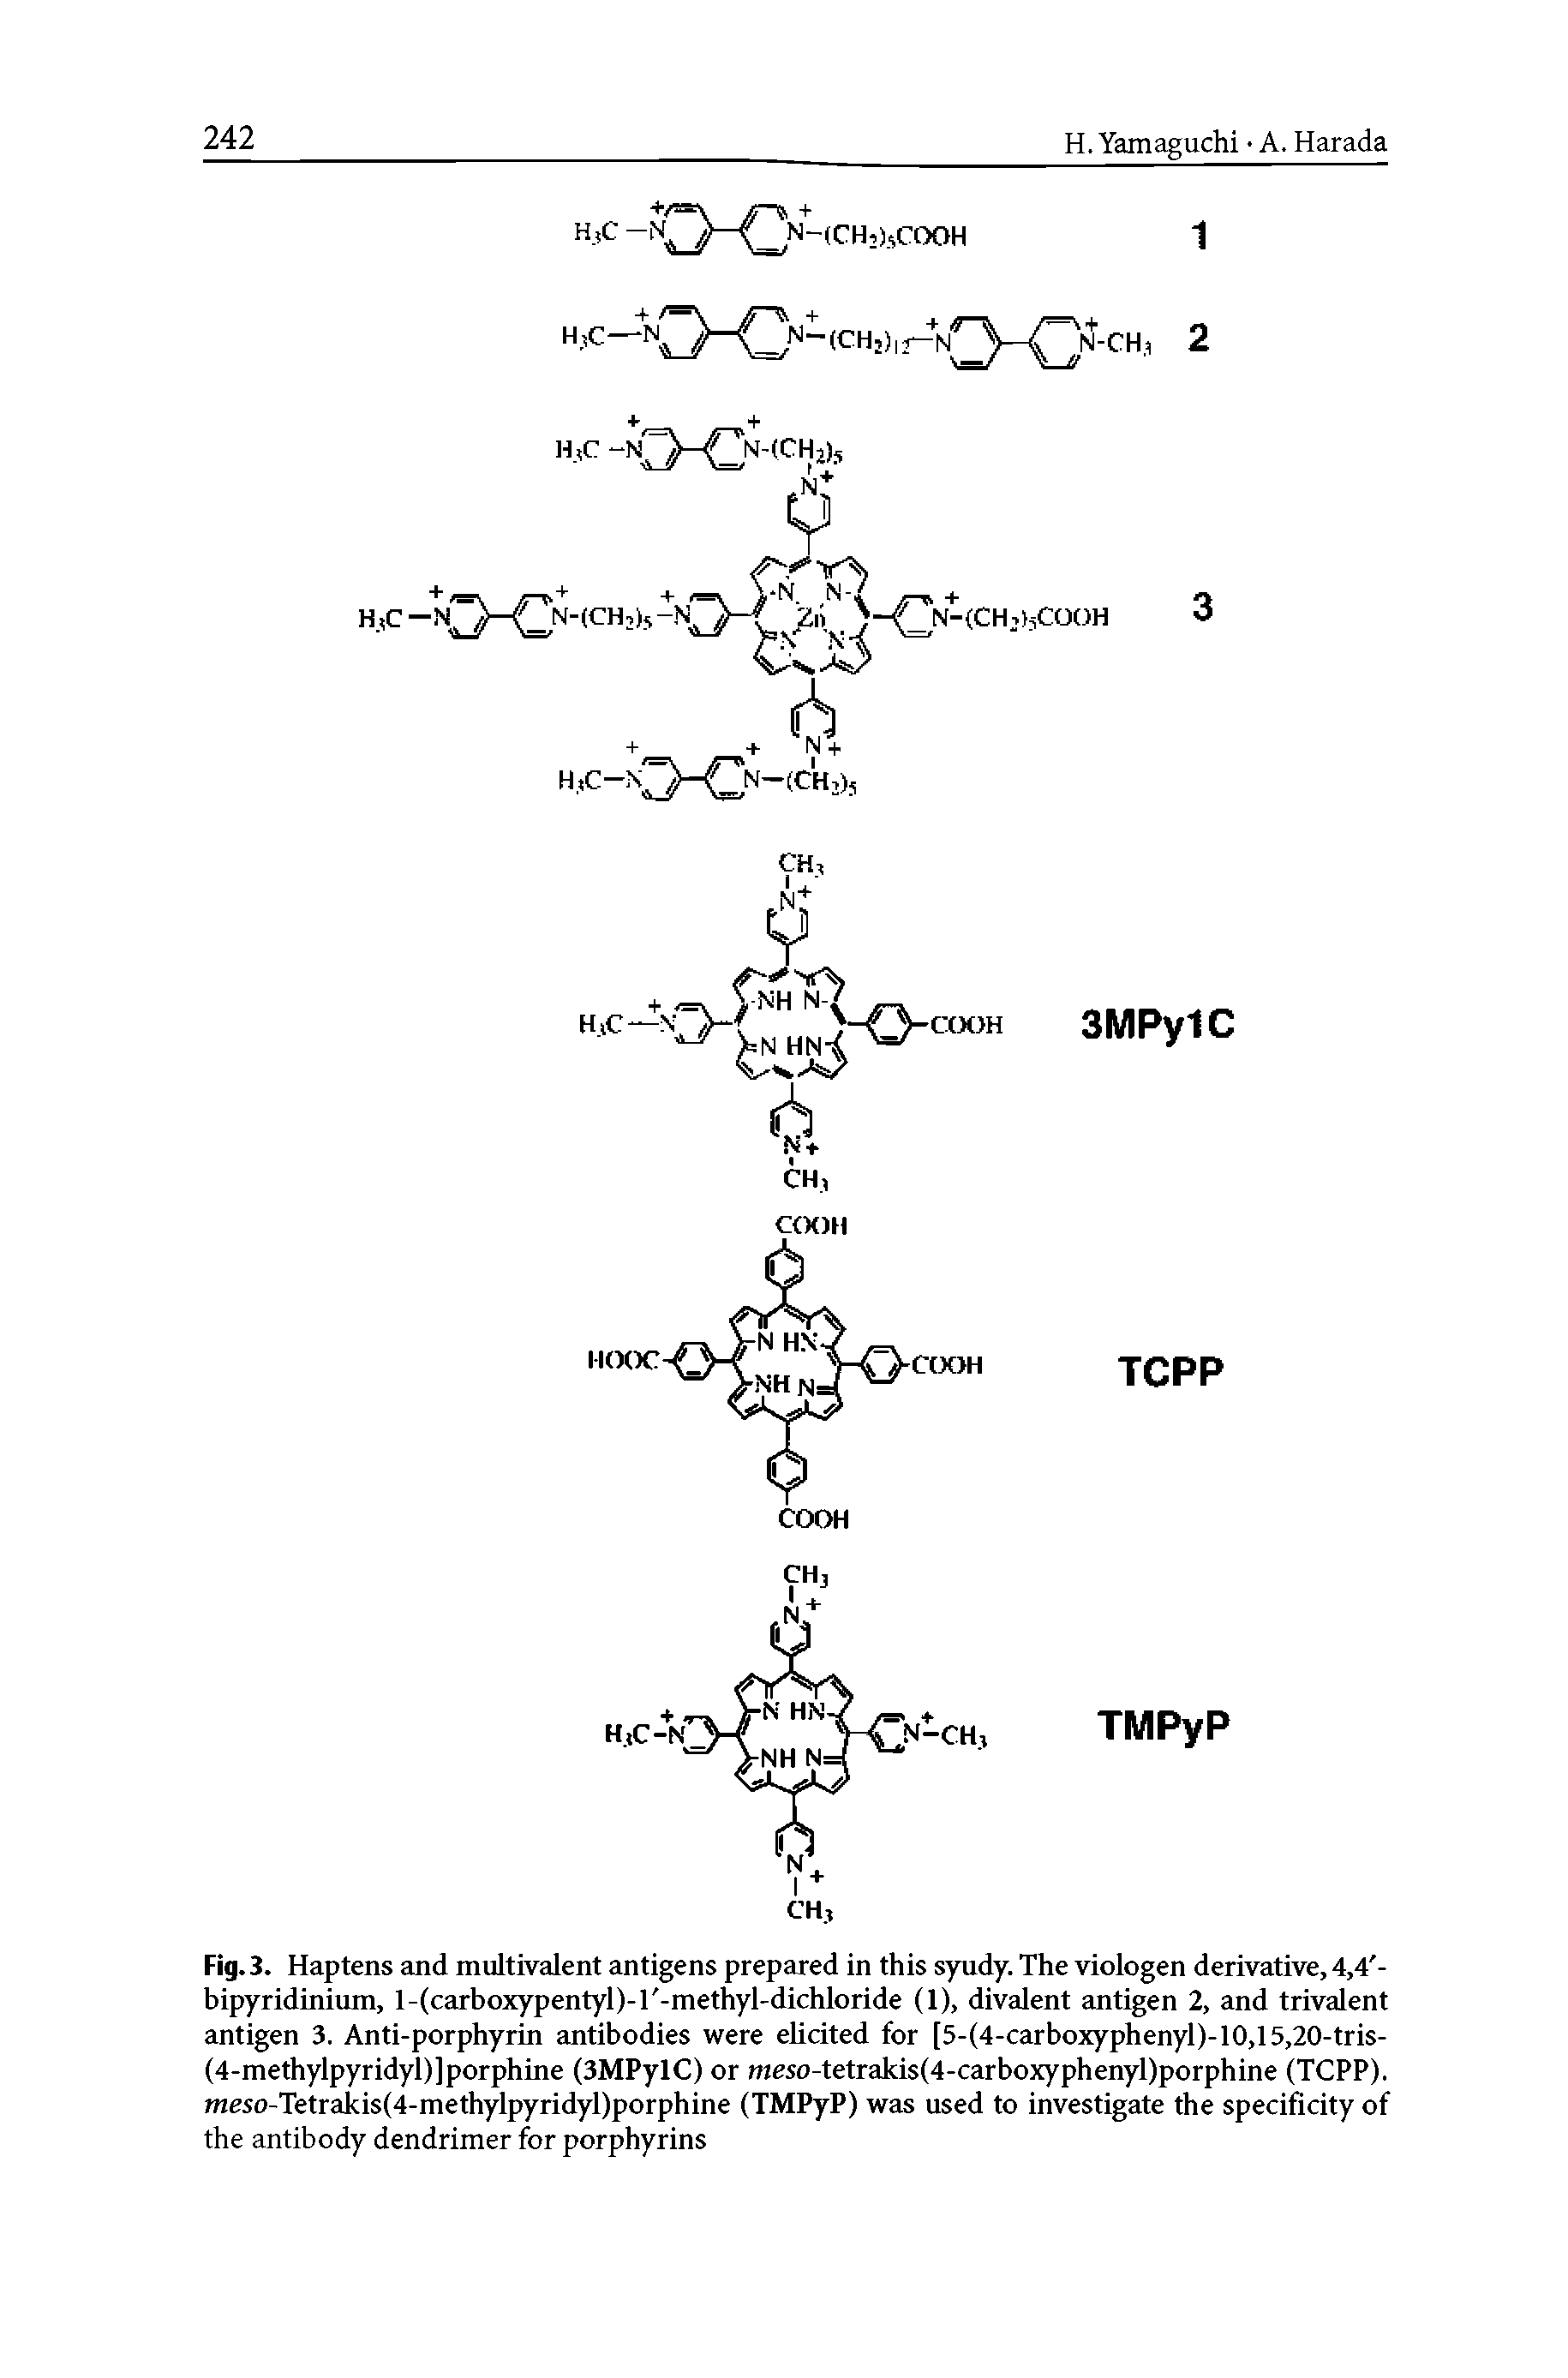 Fig. 3. Haptens and multivalent antigens prepared in this syudy. The viologen derivative, 4,4 -bipyridinium, l-(carboxypentyl)-l -methyl-dichloride (1), divalent antigen 2, and trivalent antigen 3. Anti-porphyrin antibodies were elicited for [5-(4-carboxyphenyl)-10,15,20-tris-(4-methylpyridyl)]porphine (3MPylC) or meso-tetrakis(4-carboxyphenyl)porphine (TCPP). meso-Tetrakis(4-methylpyridyl)porphine (TMPyP) was used to investigate the specificity of the antibody dendrimer for porphyrins...